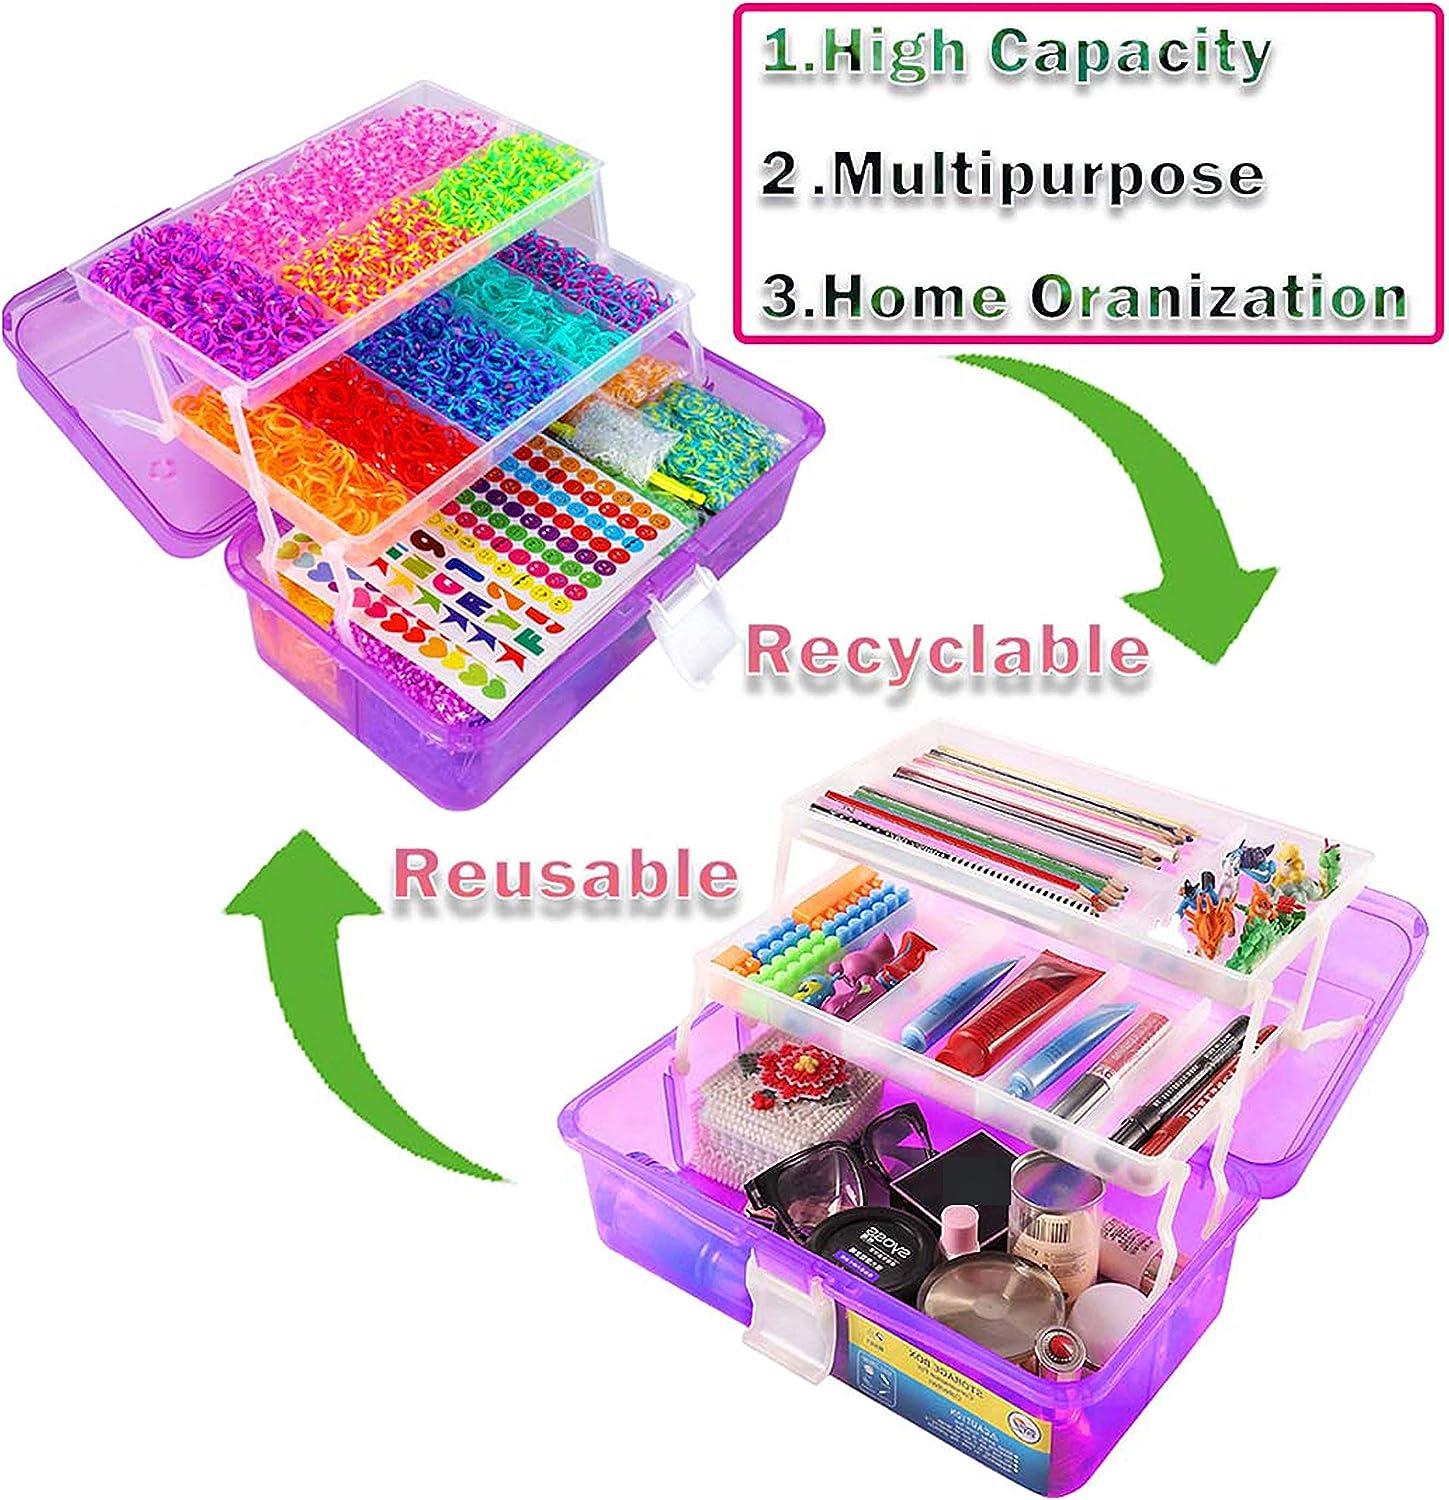 VICOVI 15000 Colorful Rubber Loom Bands Refill Kit for Boy Girl DIY Craft  Gift Set Include: + 500 Cute Clips+ 6 Hooks + 15 Charms